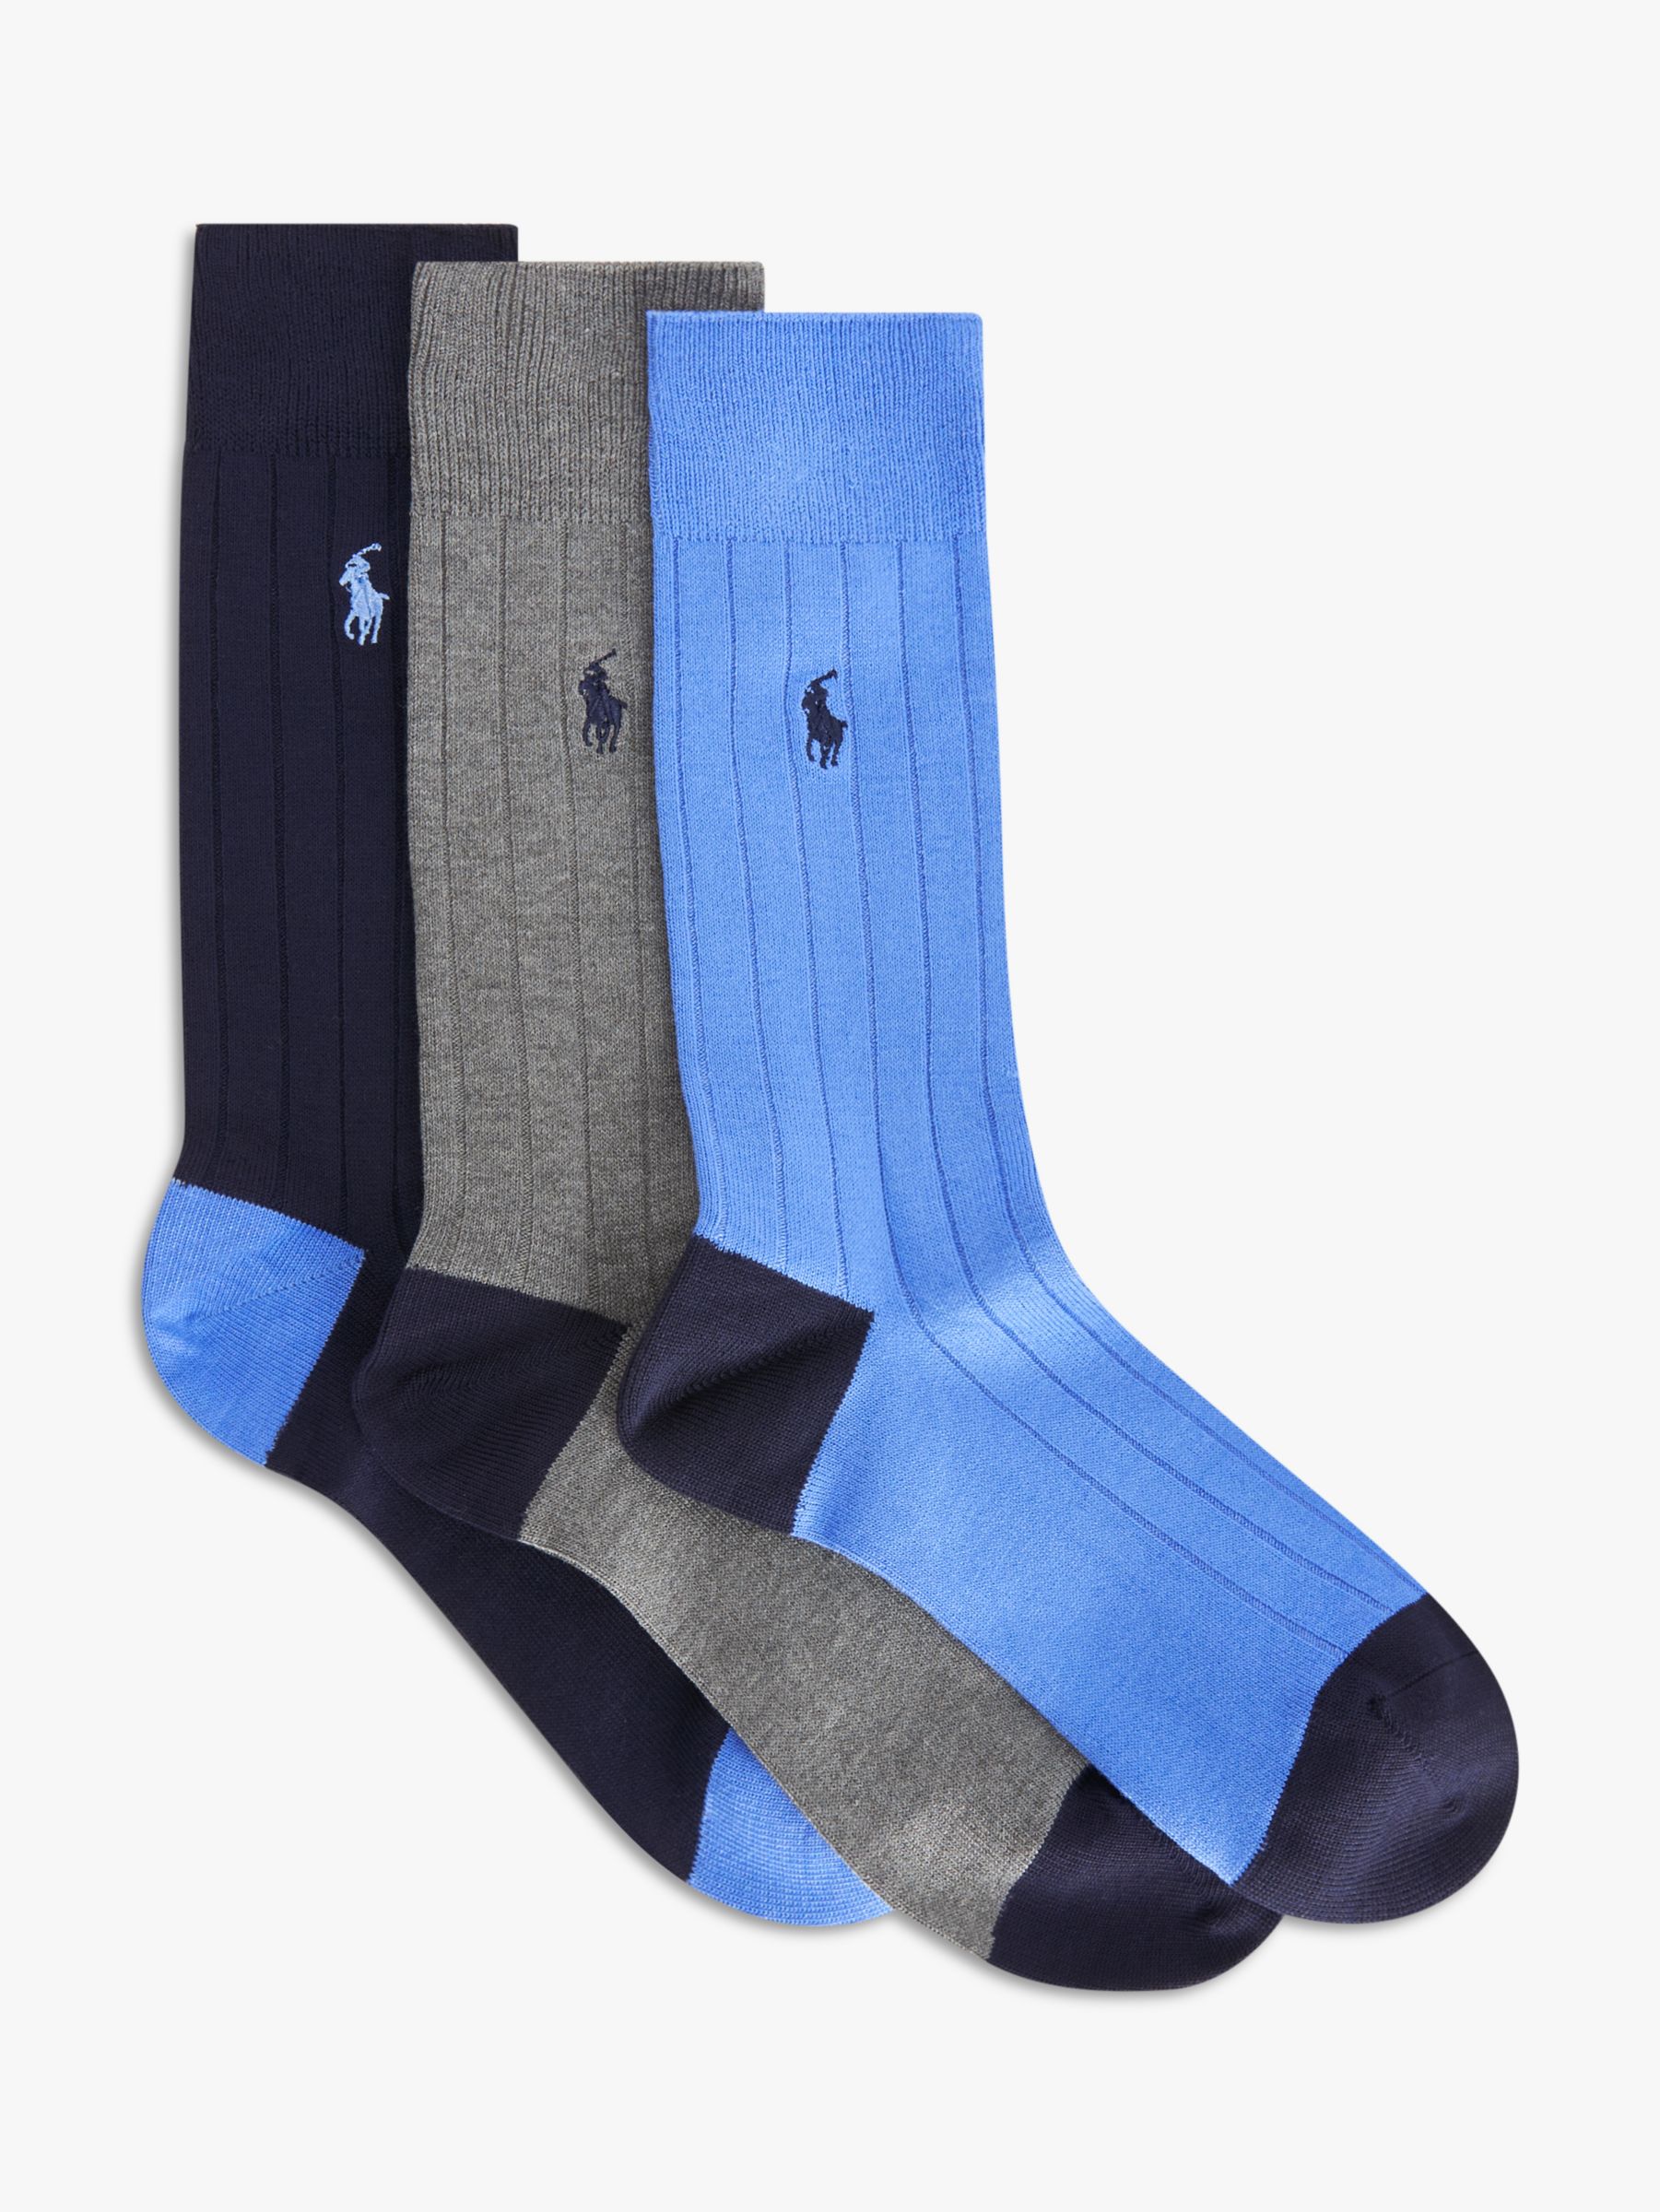 Buy Polo Ralph Lauren Soft Rib Ankle Socks, Pack of 3, Bright Blue/Grey/Navy Online at johnlewis.com